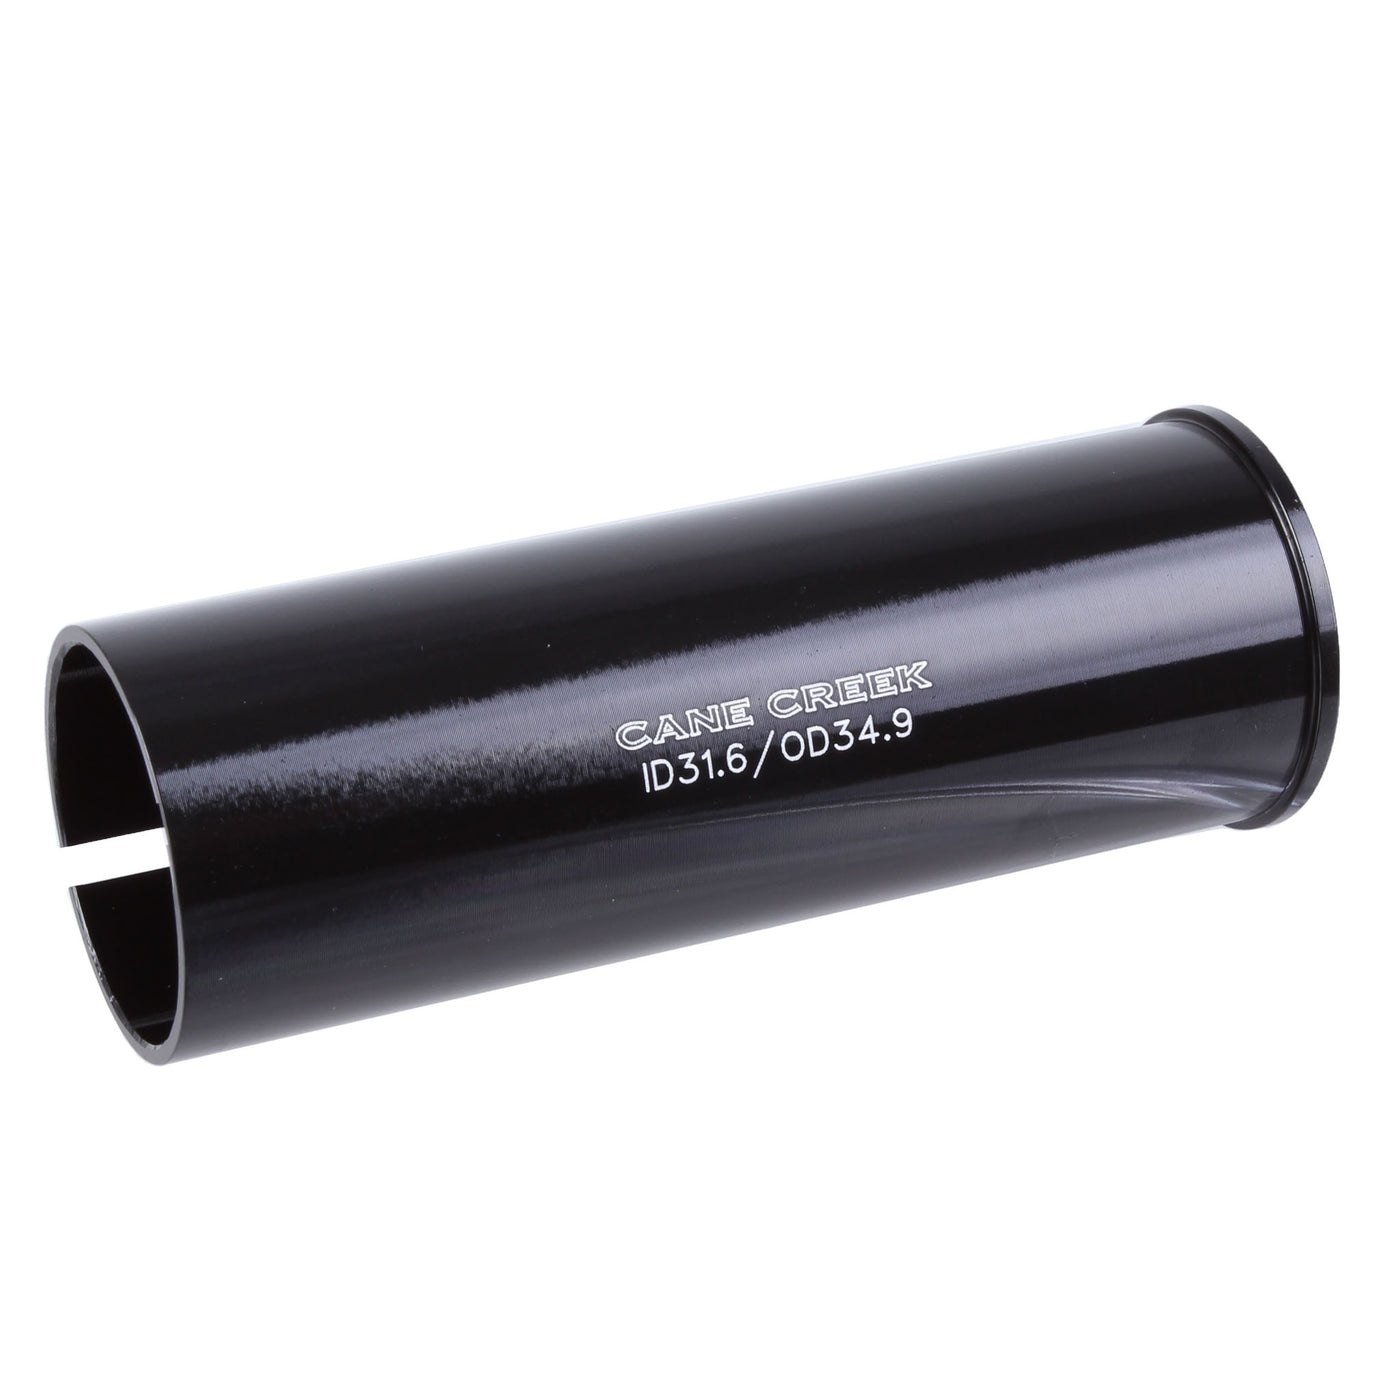 Cane Creek Seat Post Spacer Suspension Seatpost Shim 31.6 to 34.9mm Black Shims